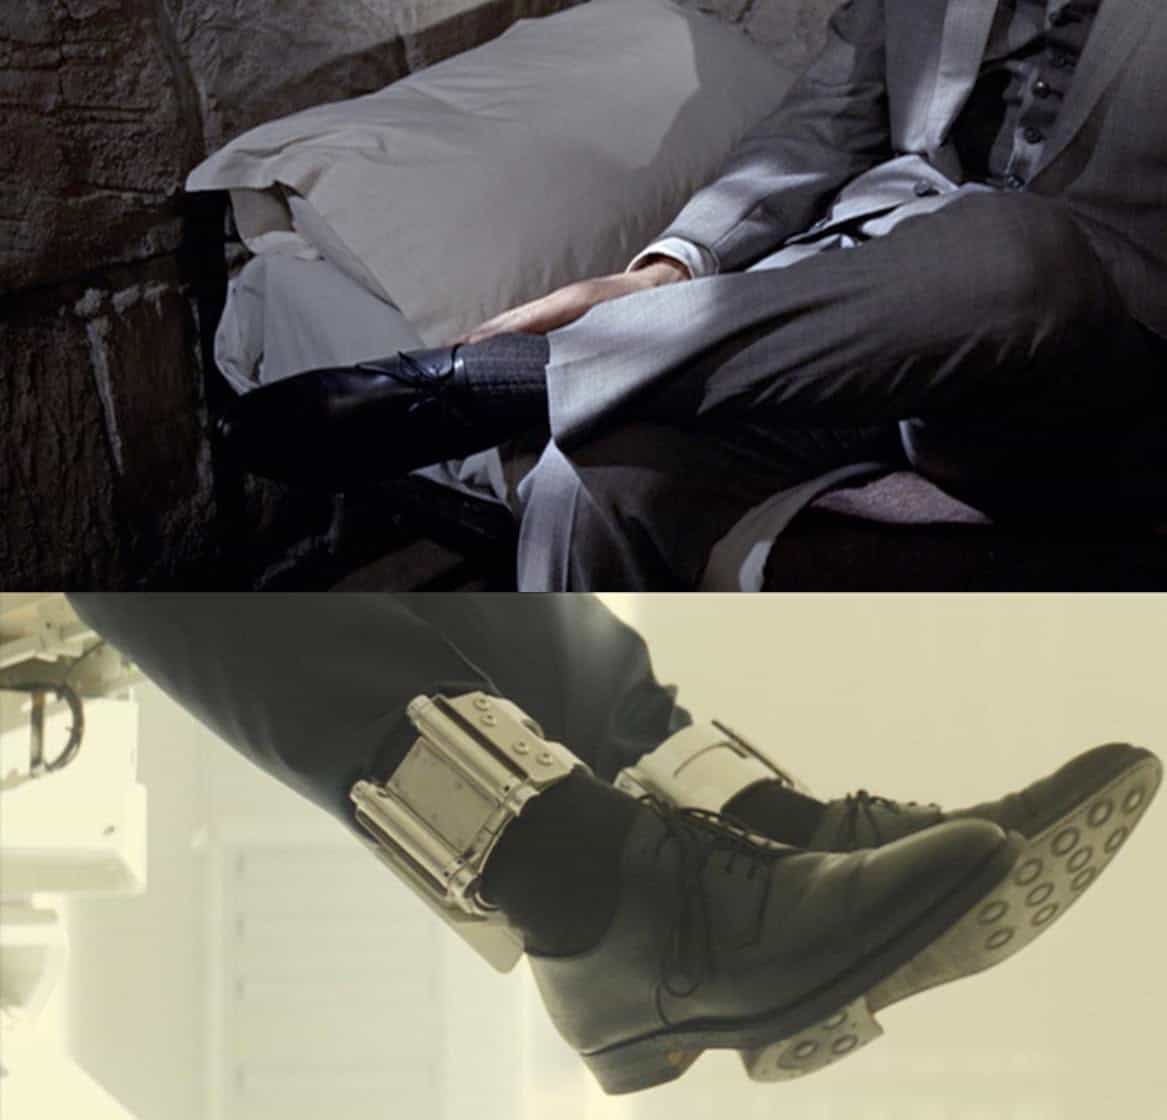 Comparison image showing the evolution of Bond's derby dress shoes from Goldfinger to contemporary